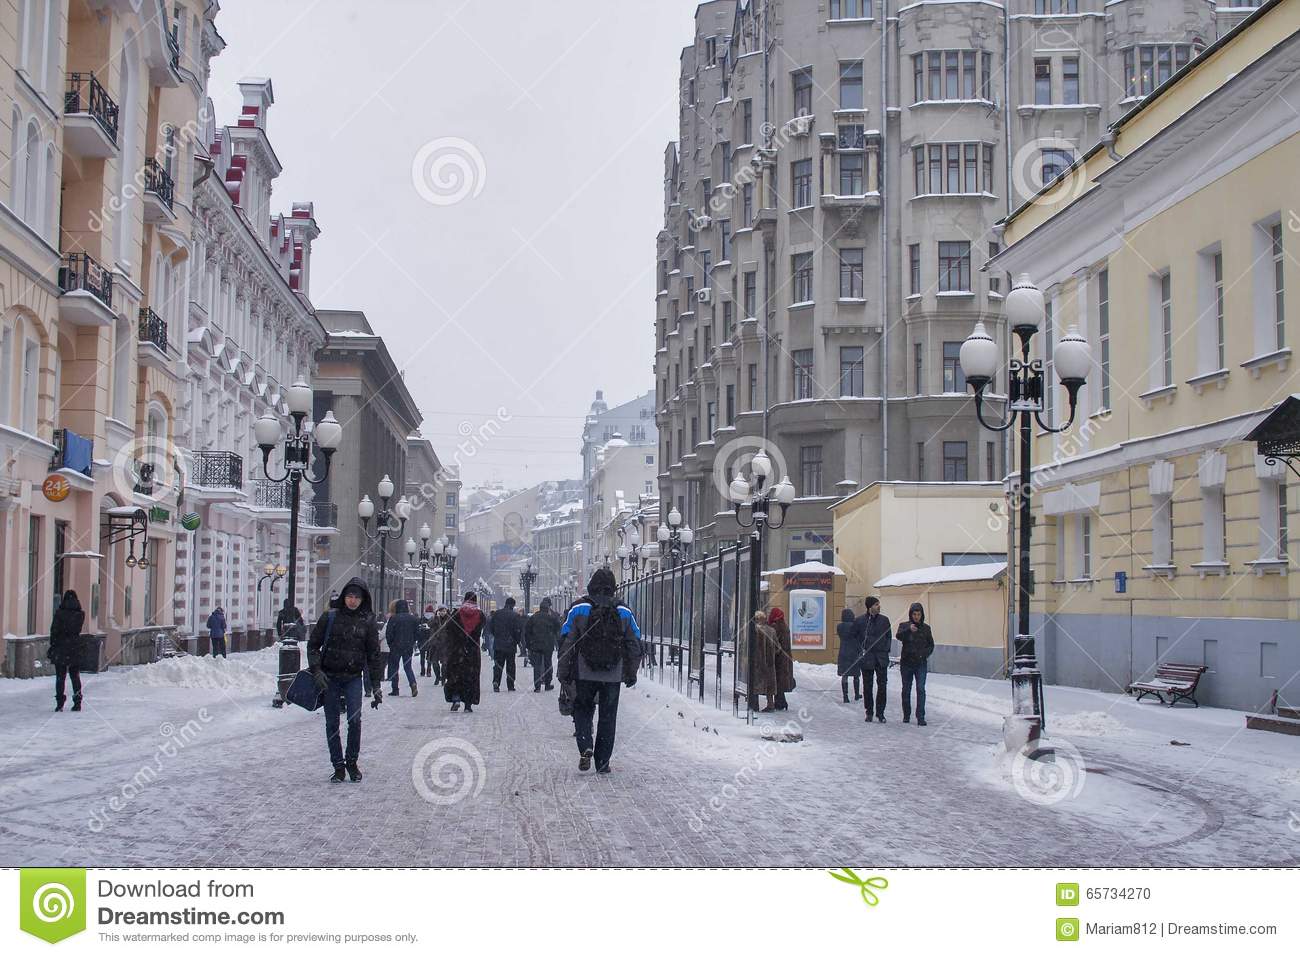 arbat-street-moscow-winter-people-walking-central-day-65734270